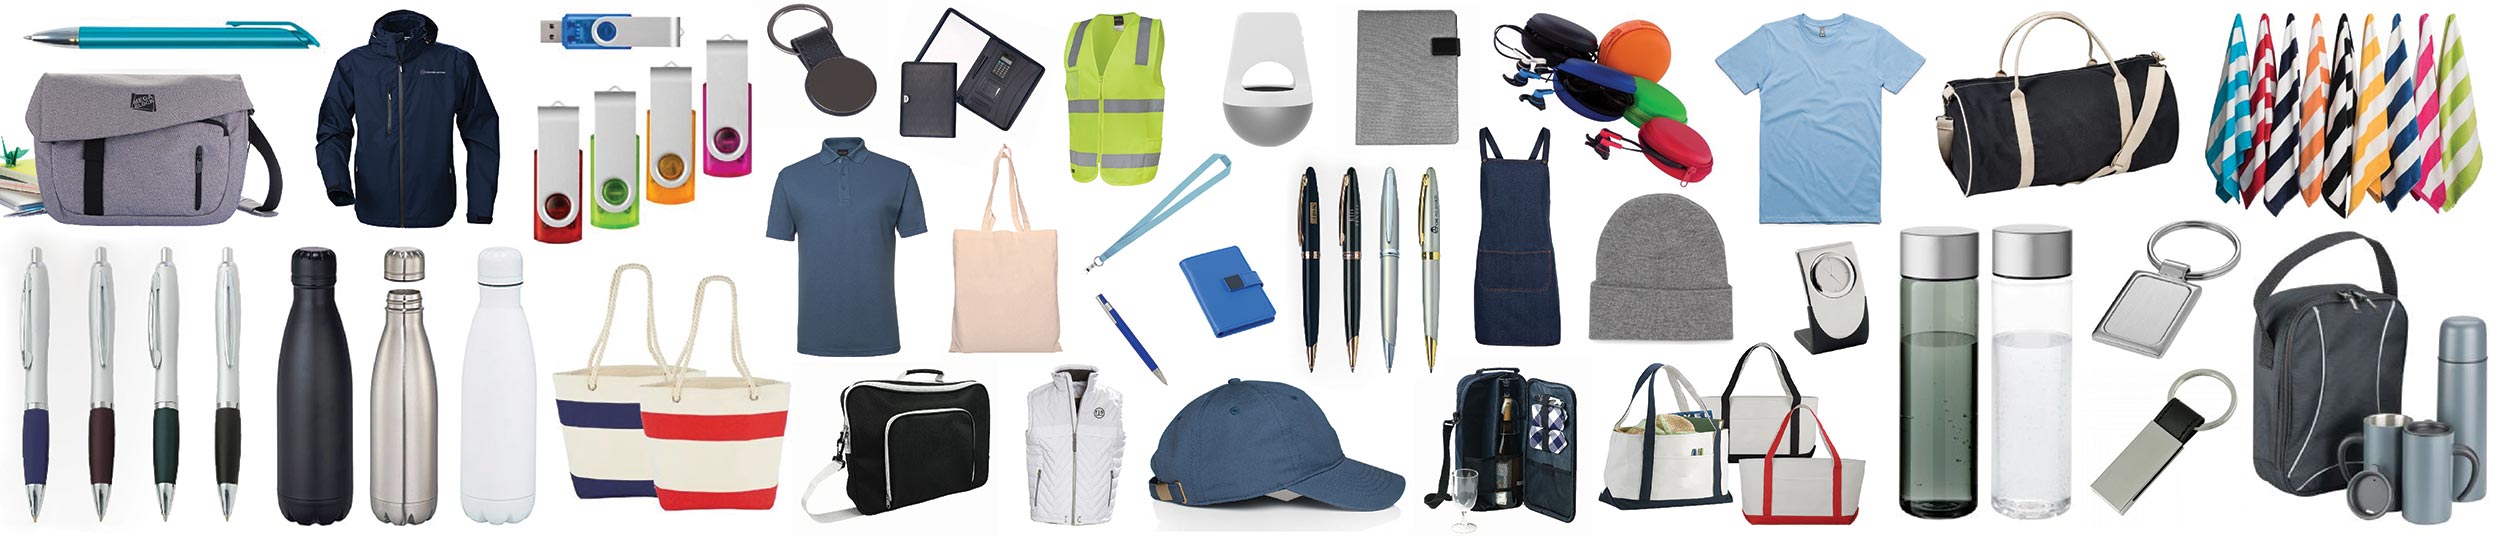 Promotional Products Melbourne – Its Pros and cons